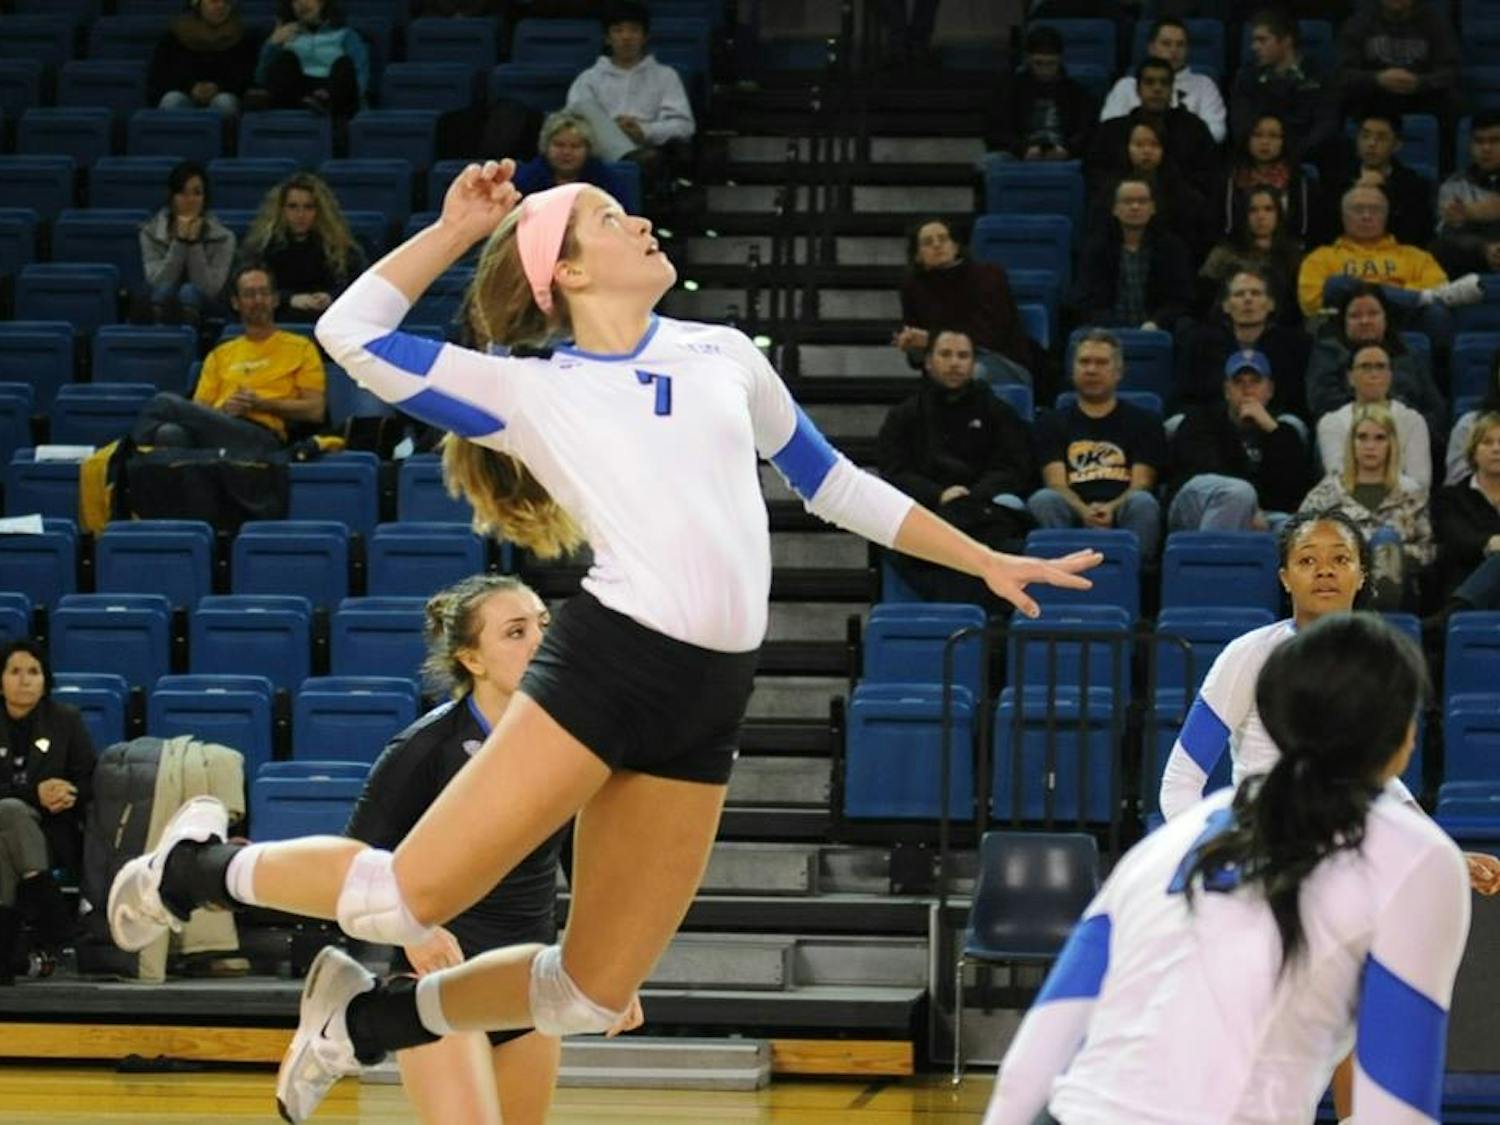 Senior outside hitter Megan Lipski goes for a kill in a game at Alumni Arena last season. The volleyball team has yet to win a game this season. 